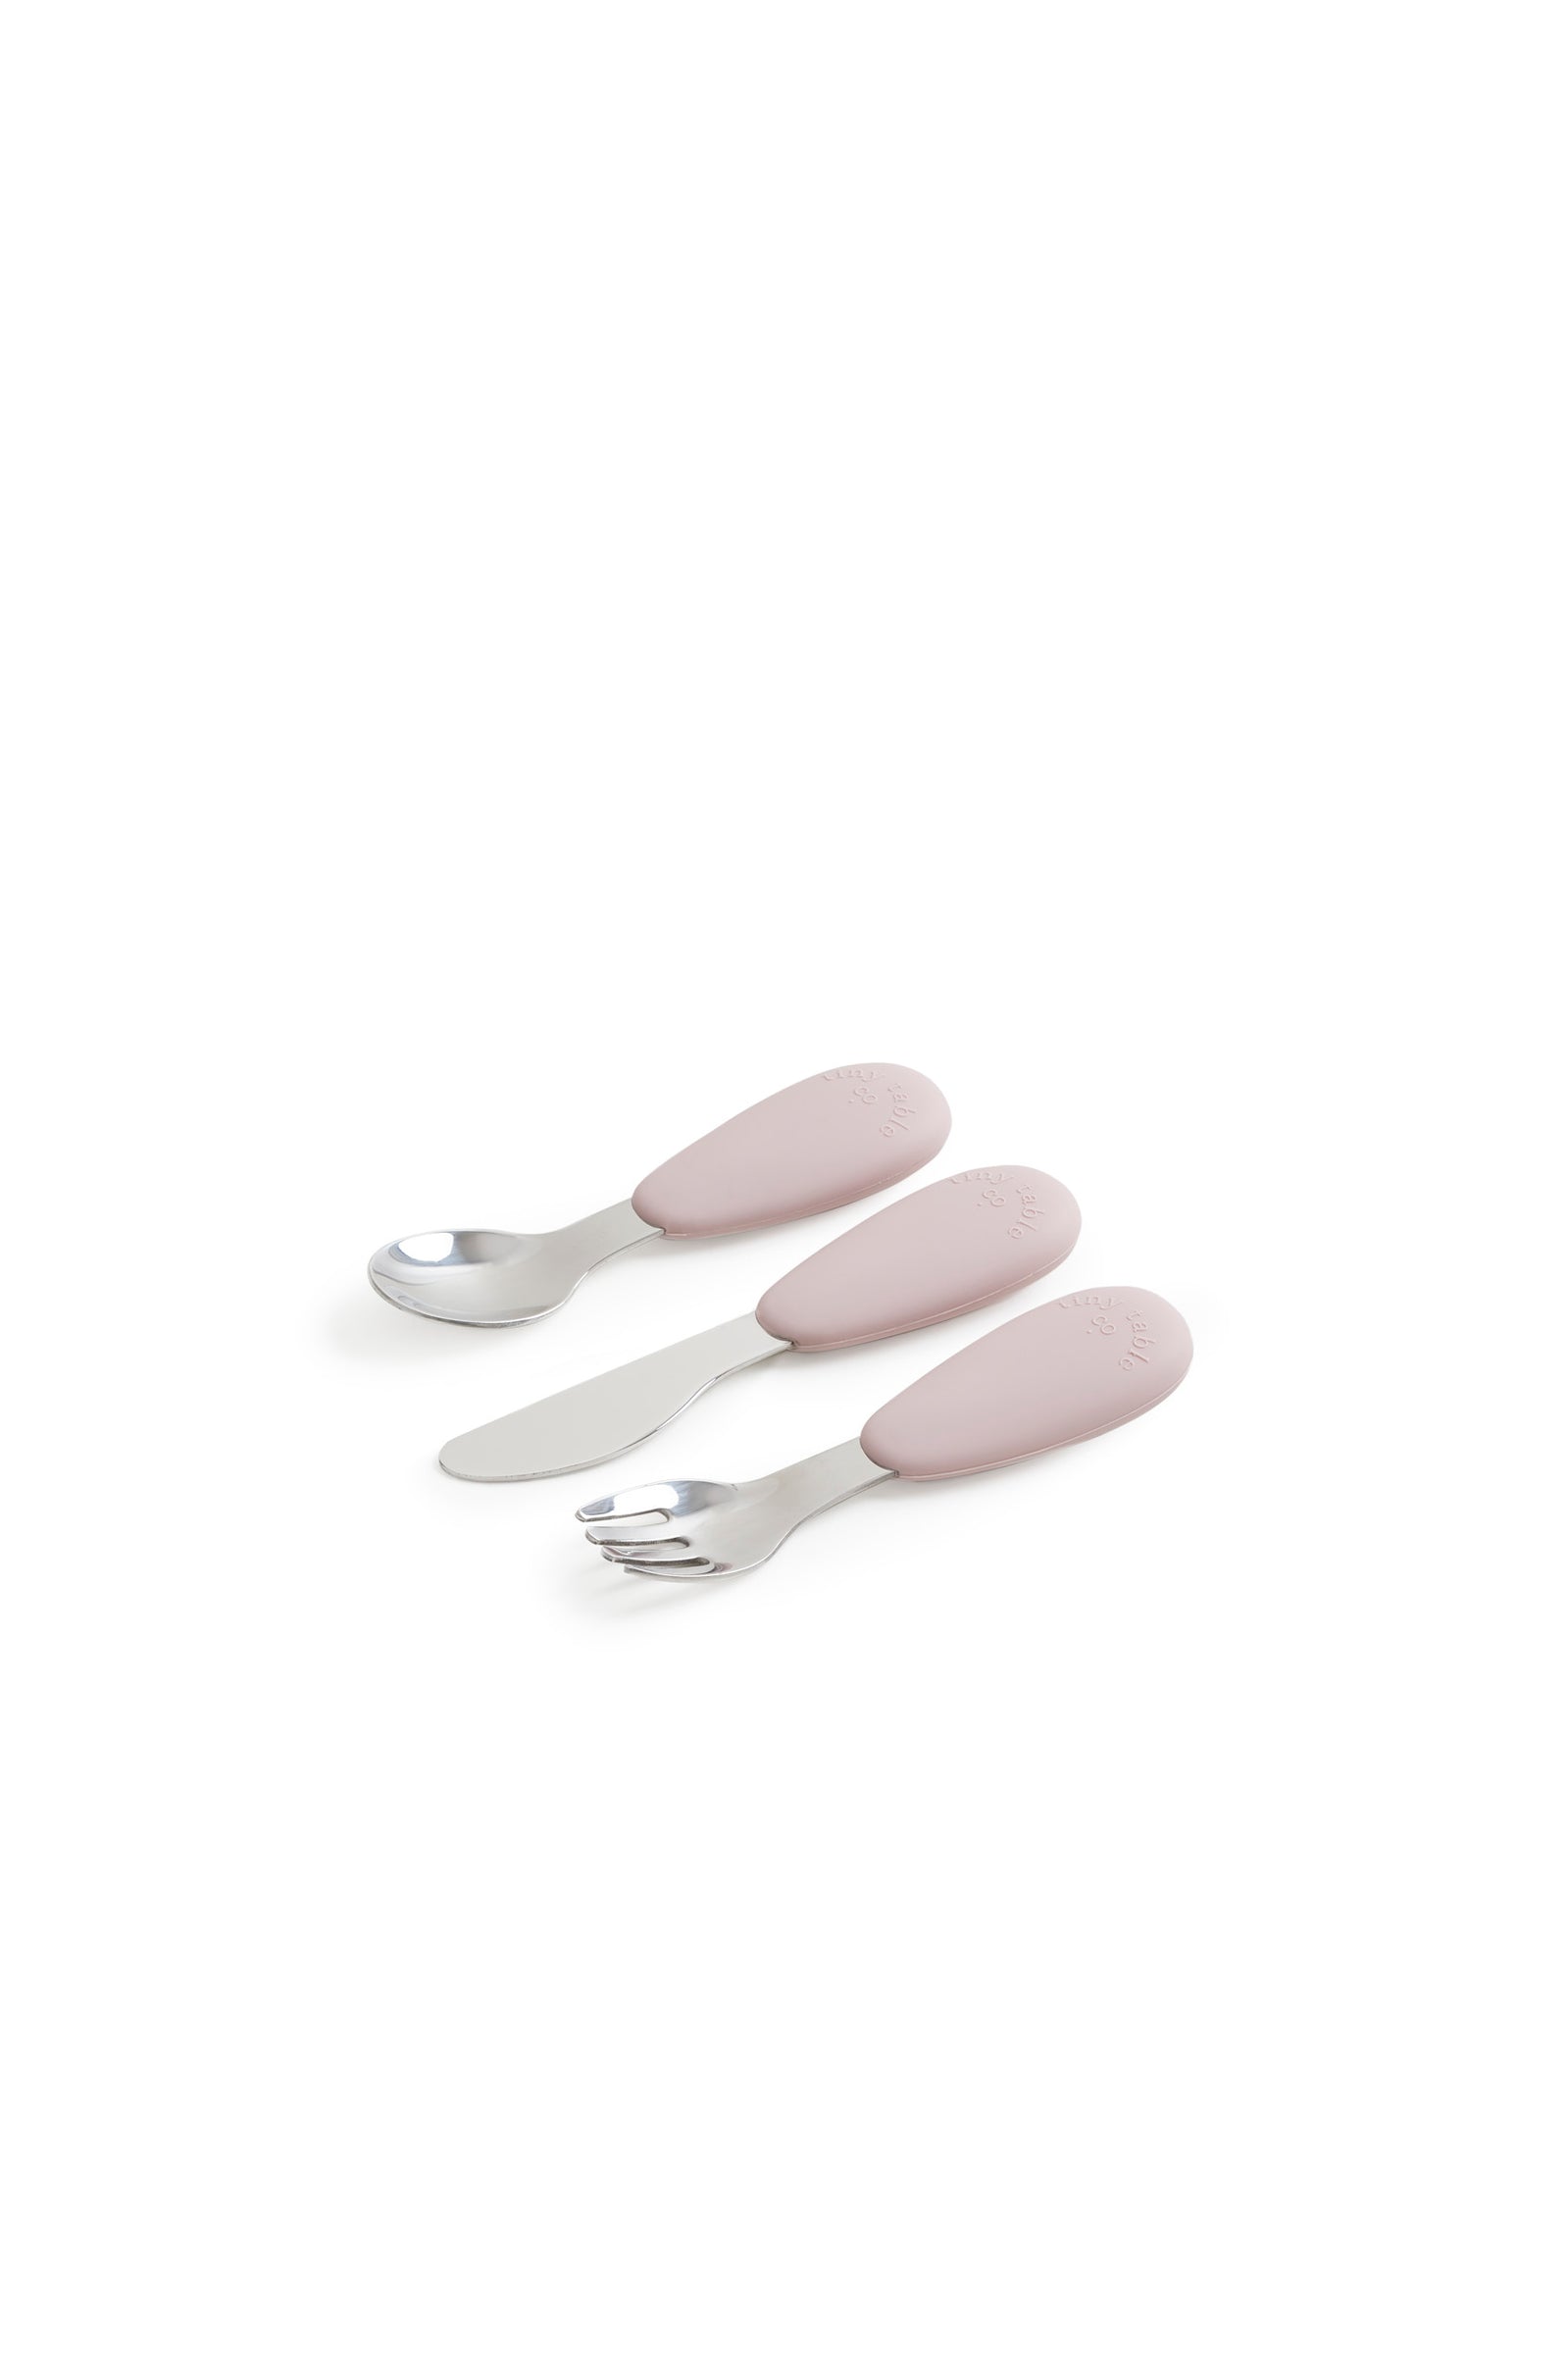 tiny table co. first cutlery set